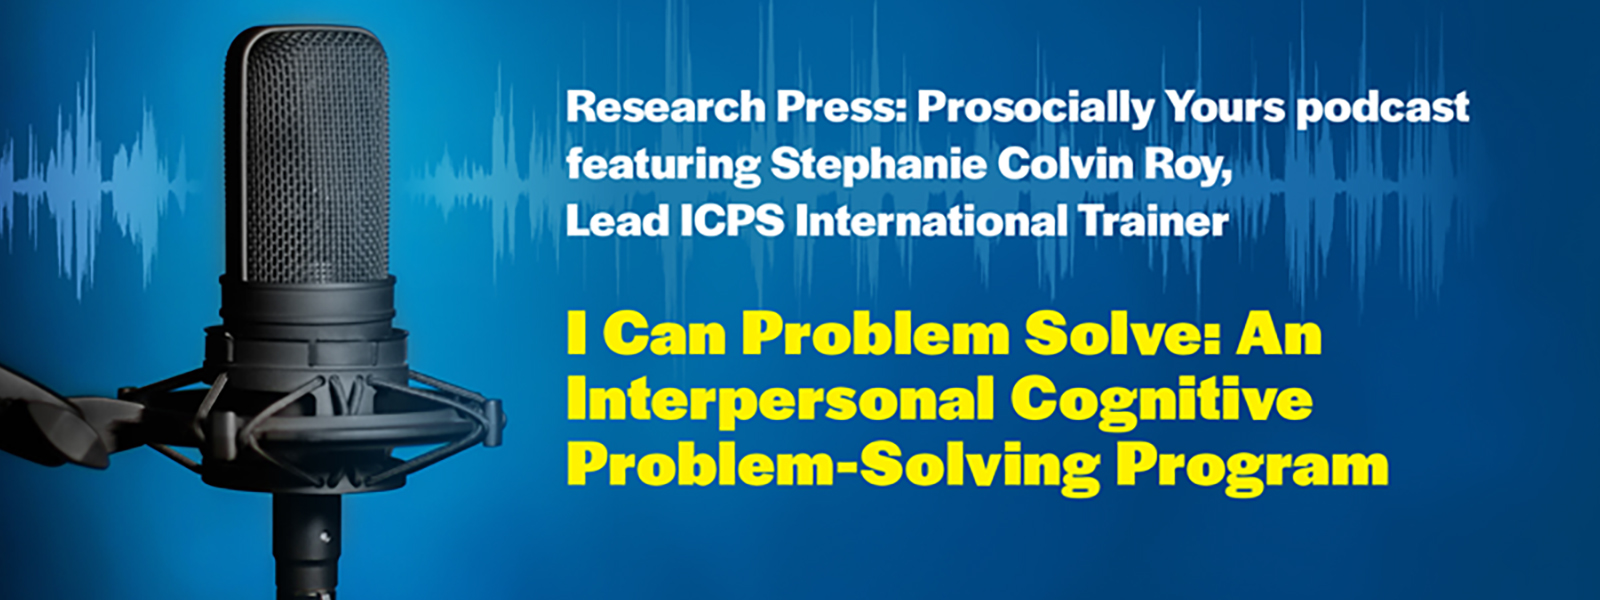 Research Press: Prosocially Yours podcast featuring Stephanie Colvin Roy, Lead ICPS International Trainer. I Can Problem Solve: An Interpersonal Cognitive Problem-Solving Program